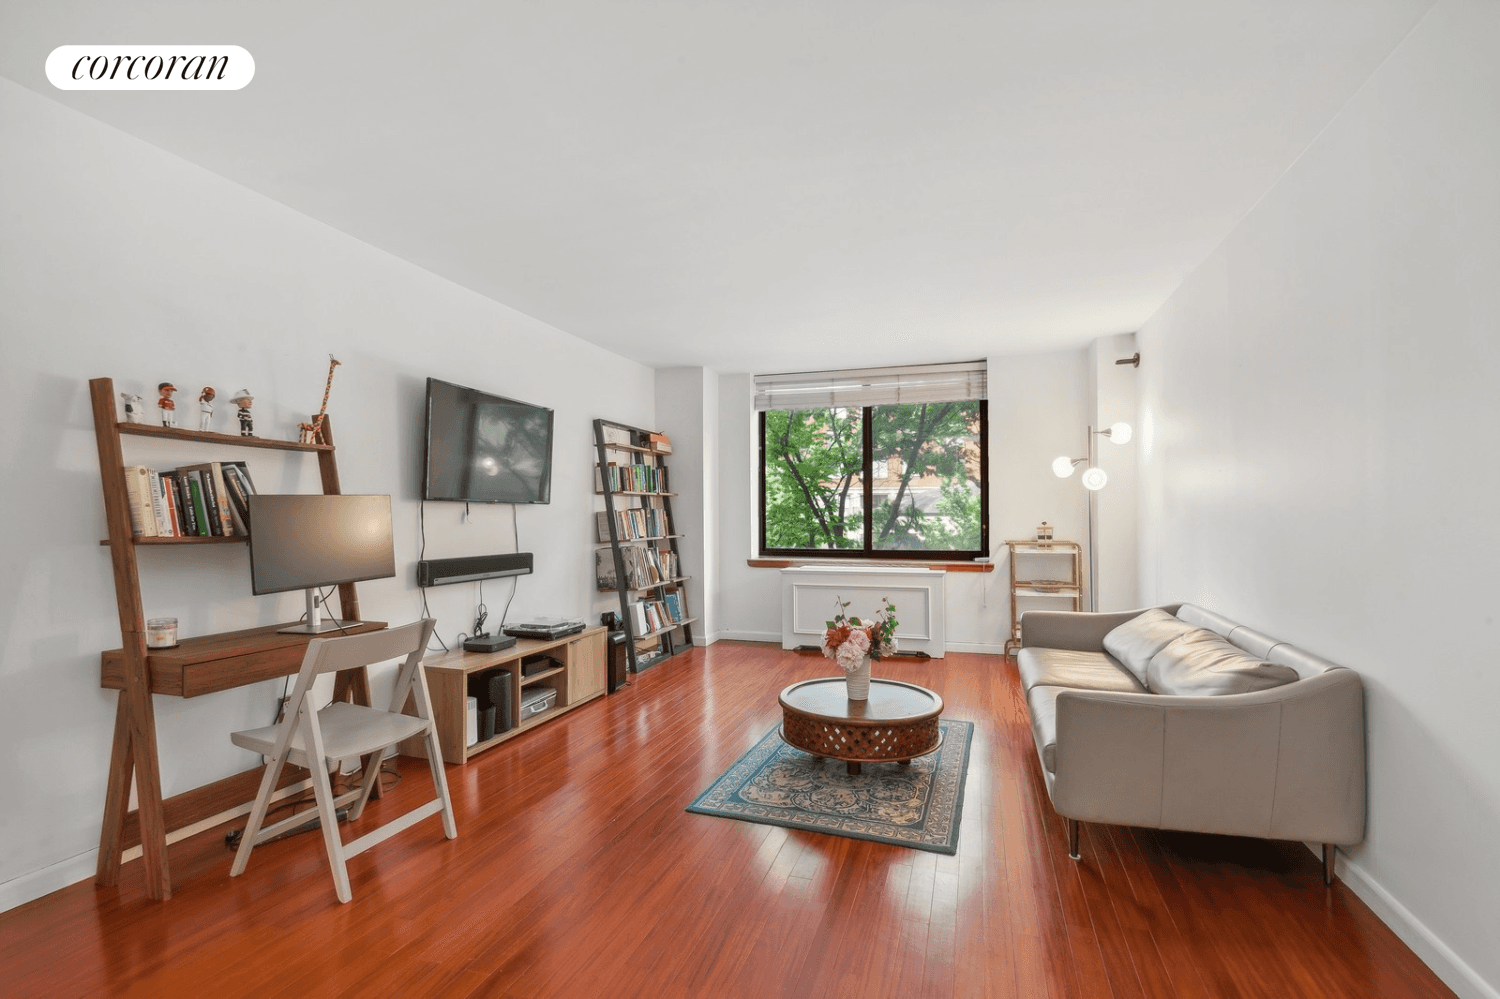 This beautifully renovated over sized one bedroom, one and a half bathroom home with in unit washer dryer is now available at The Regatta, a boutique condominium located at the ...